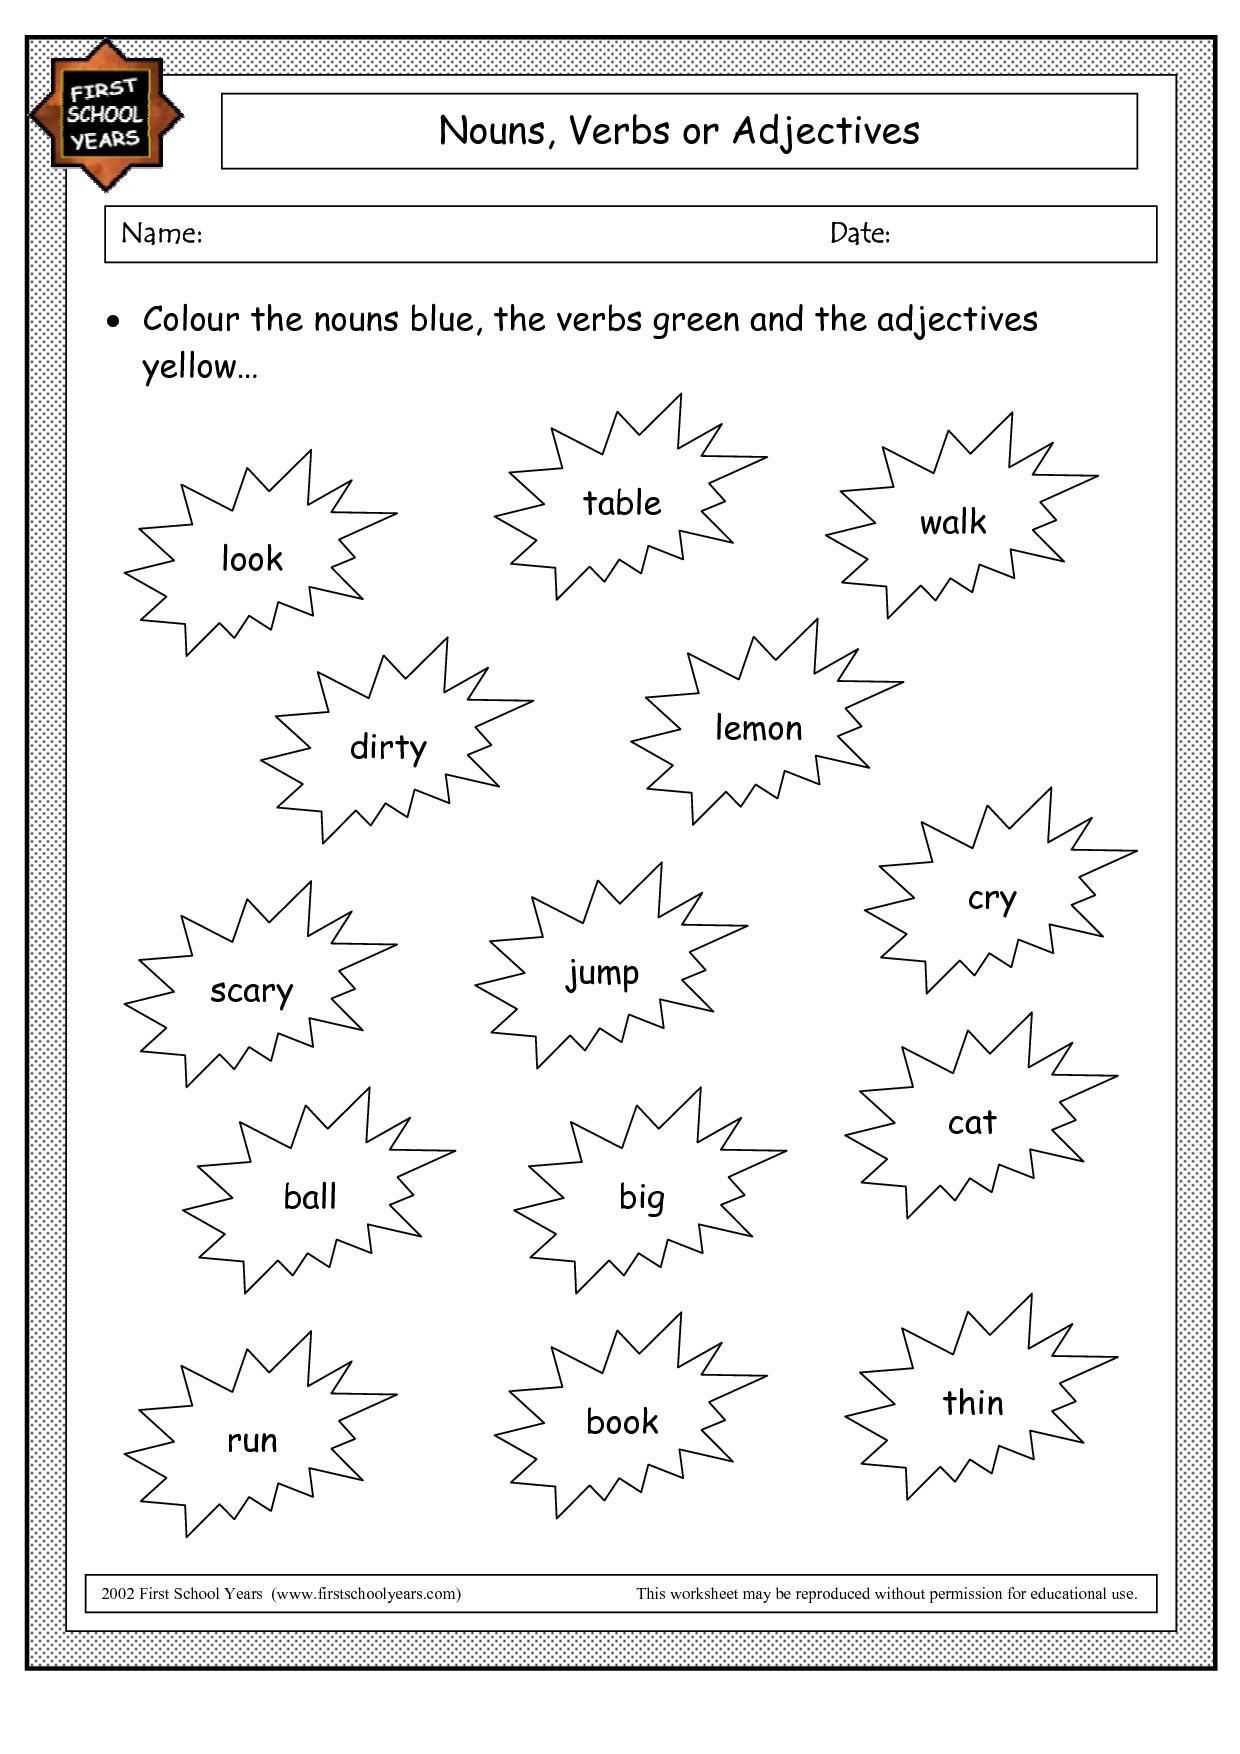 Identify Nouns and Adjectives Worksheets or Verb Noun Adjective Worksheet Worksheet for Kids Maths Printing